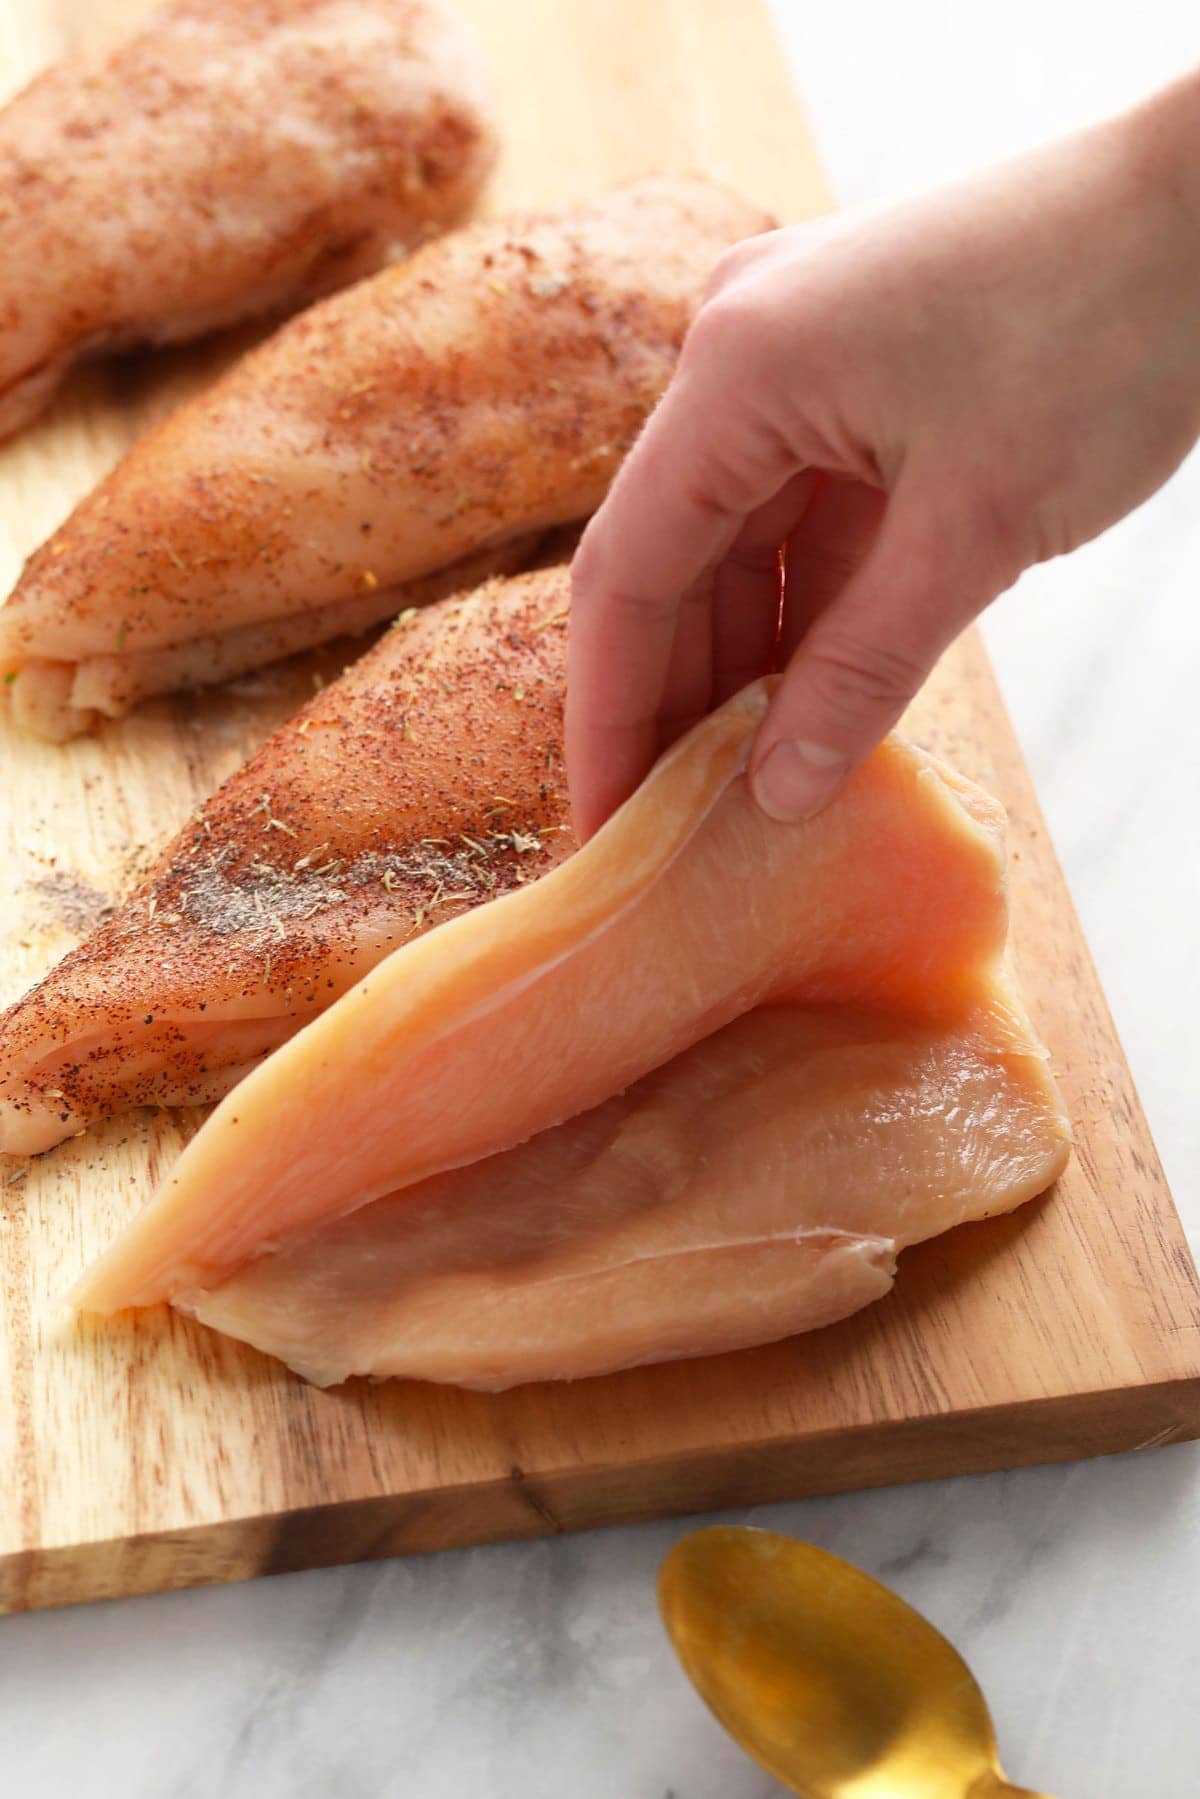 raw chicken breast cut open, ready to be stuffed with broccoli and cheese filling.